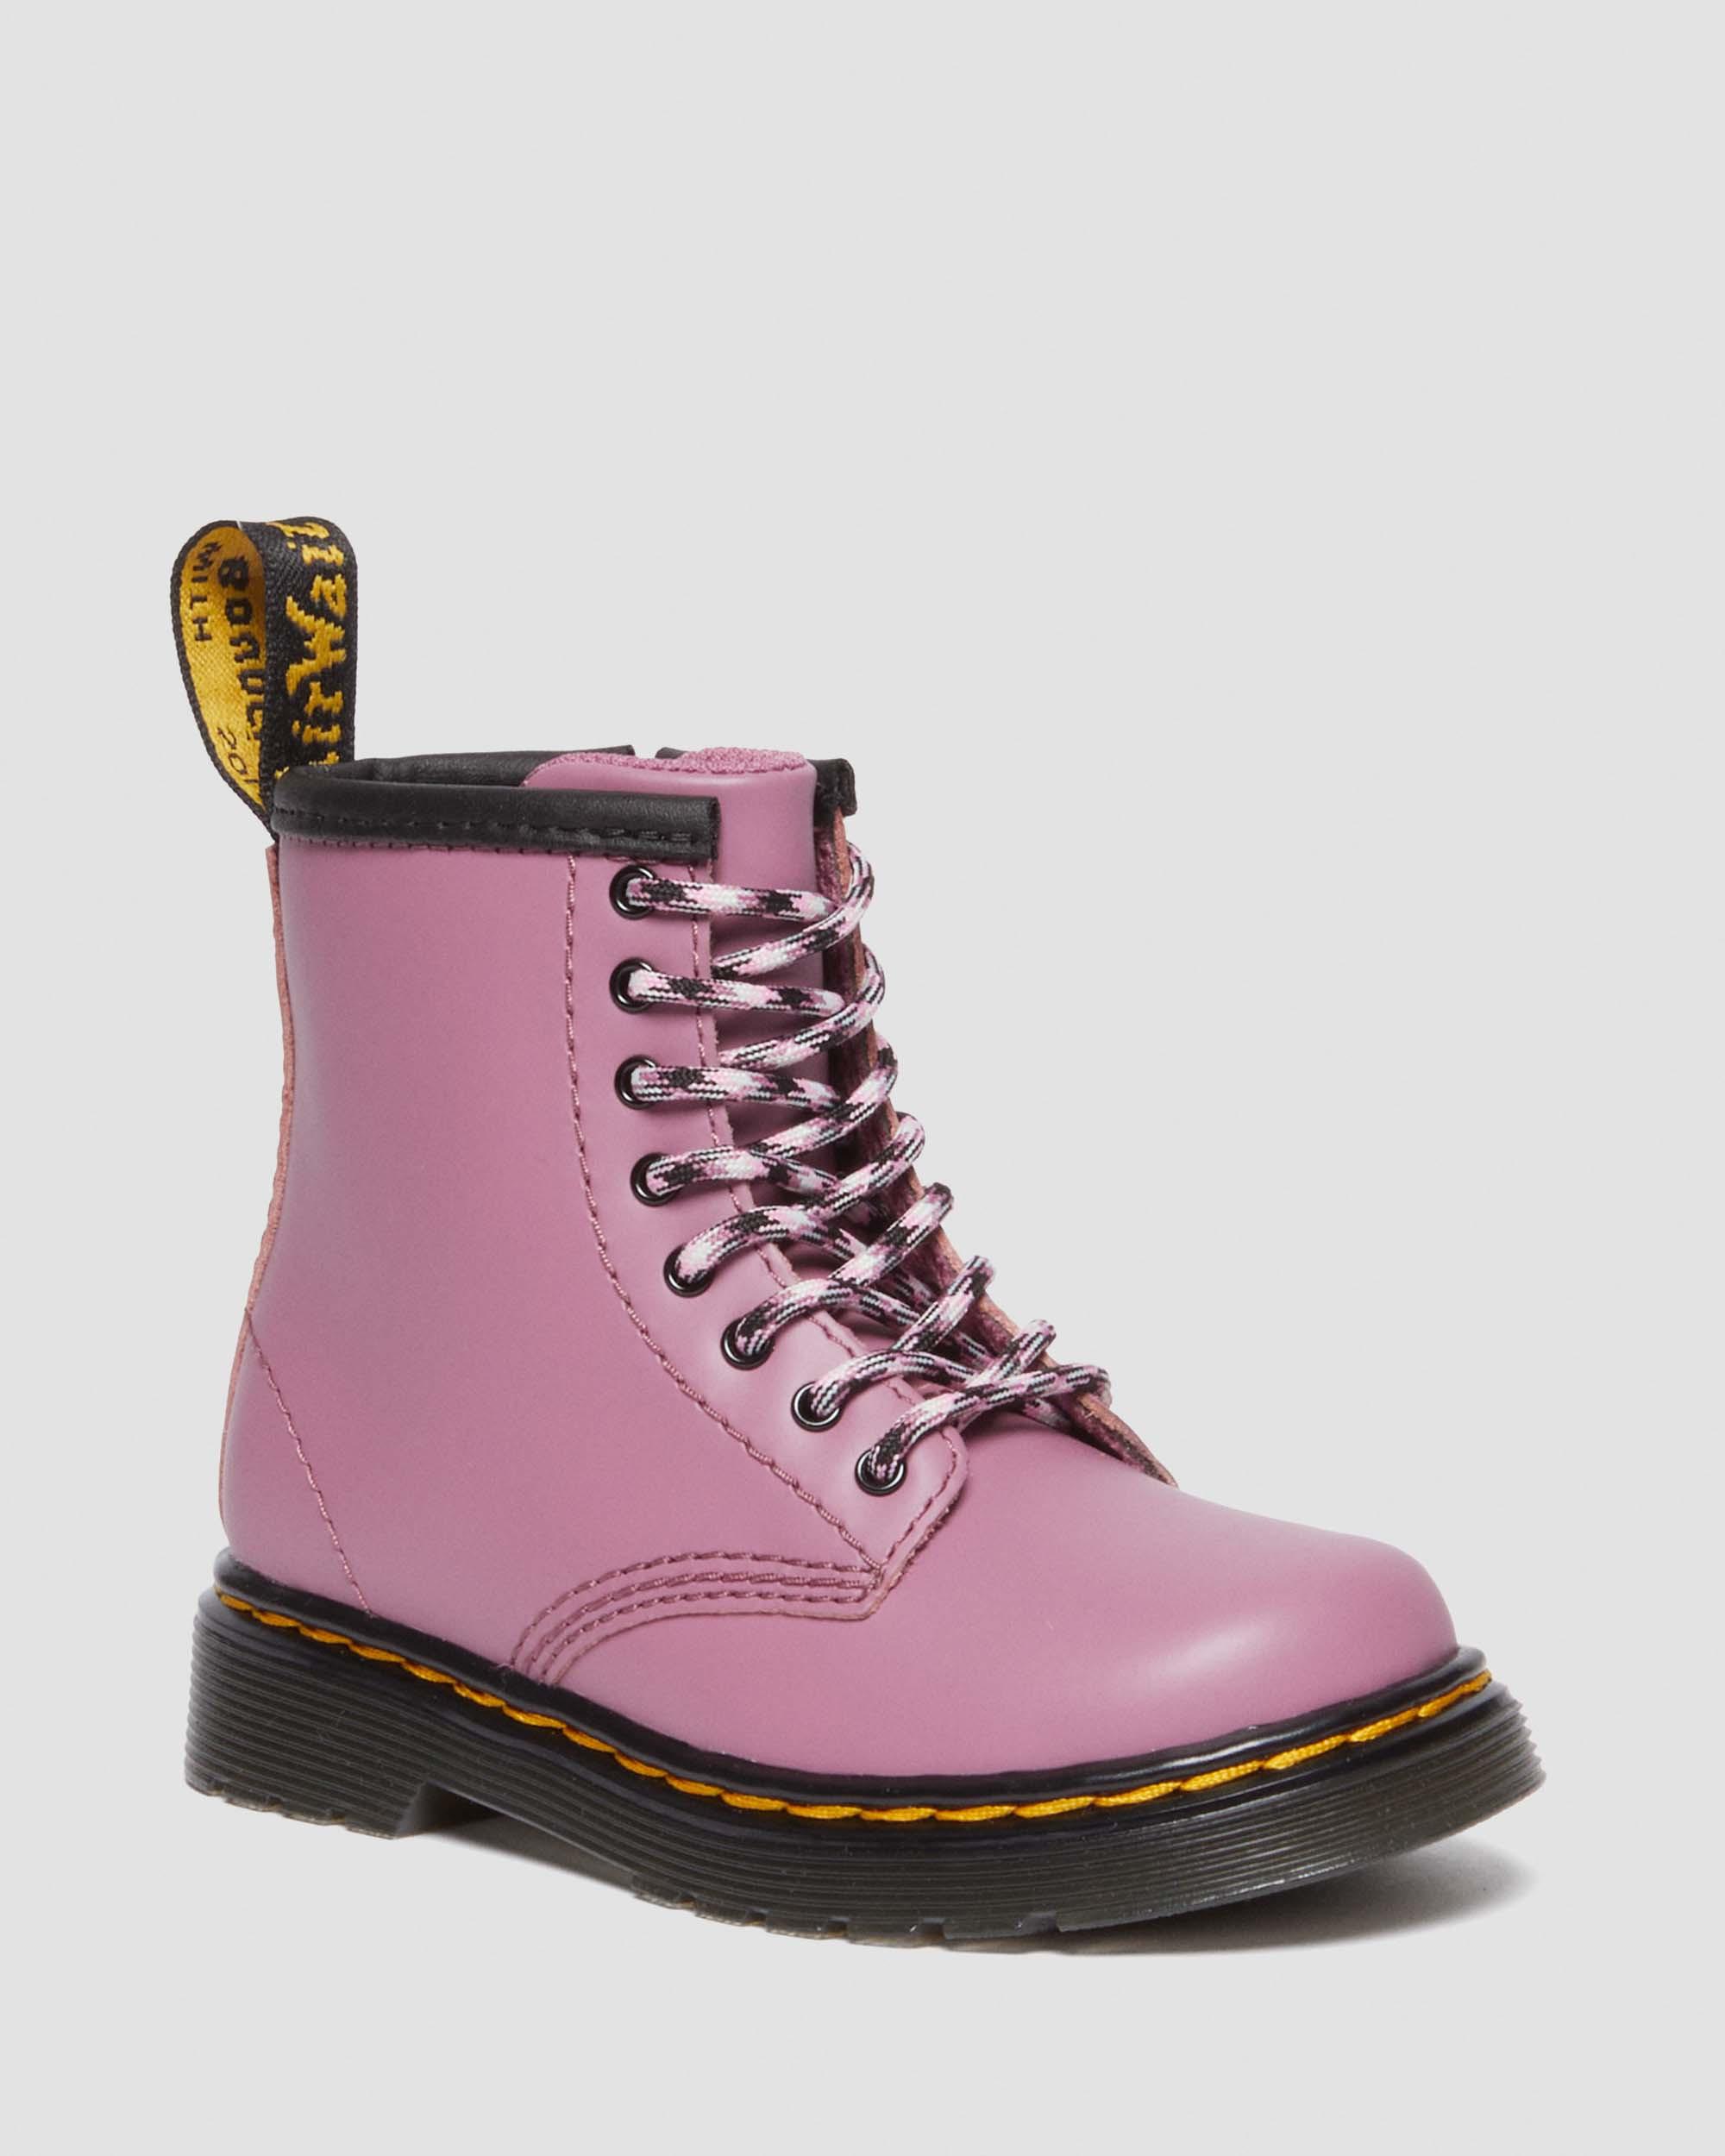 Toddler 1460 Muted Leather Lace Up Boots in Acid Pink